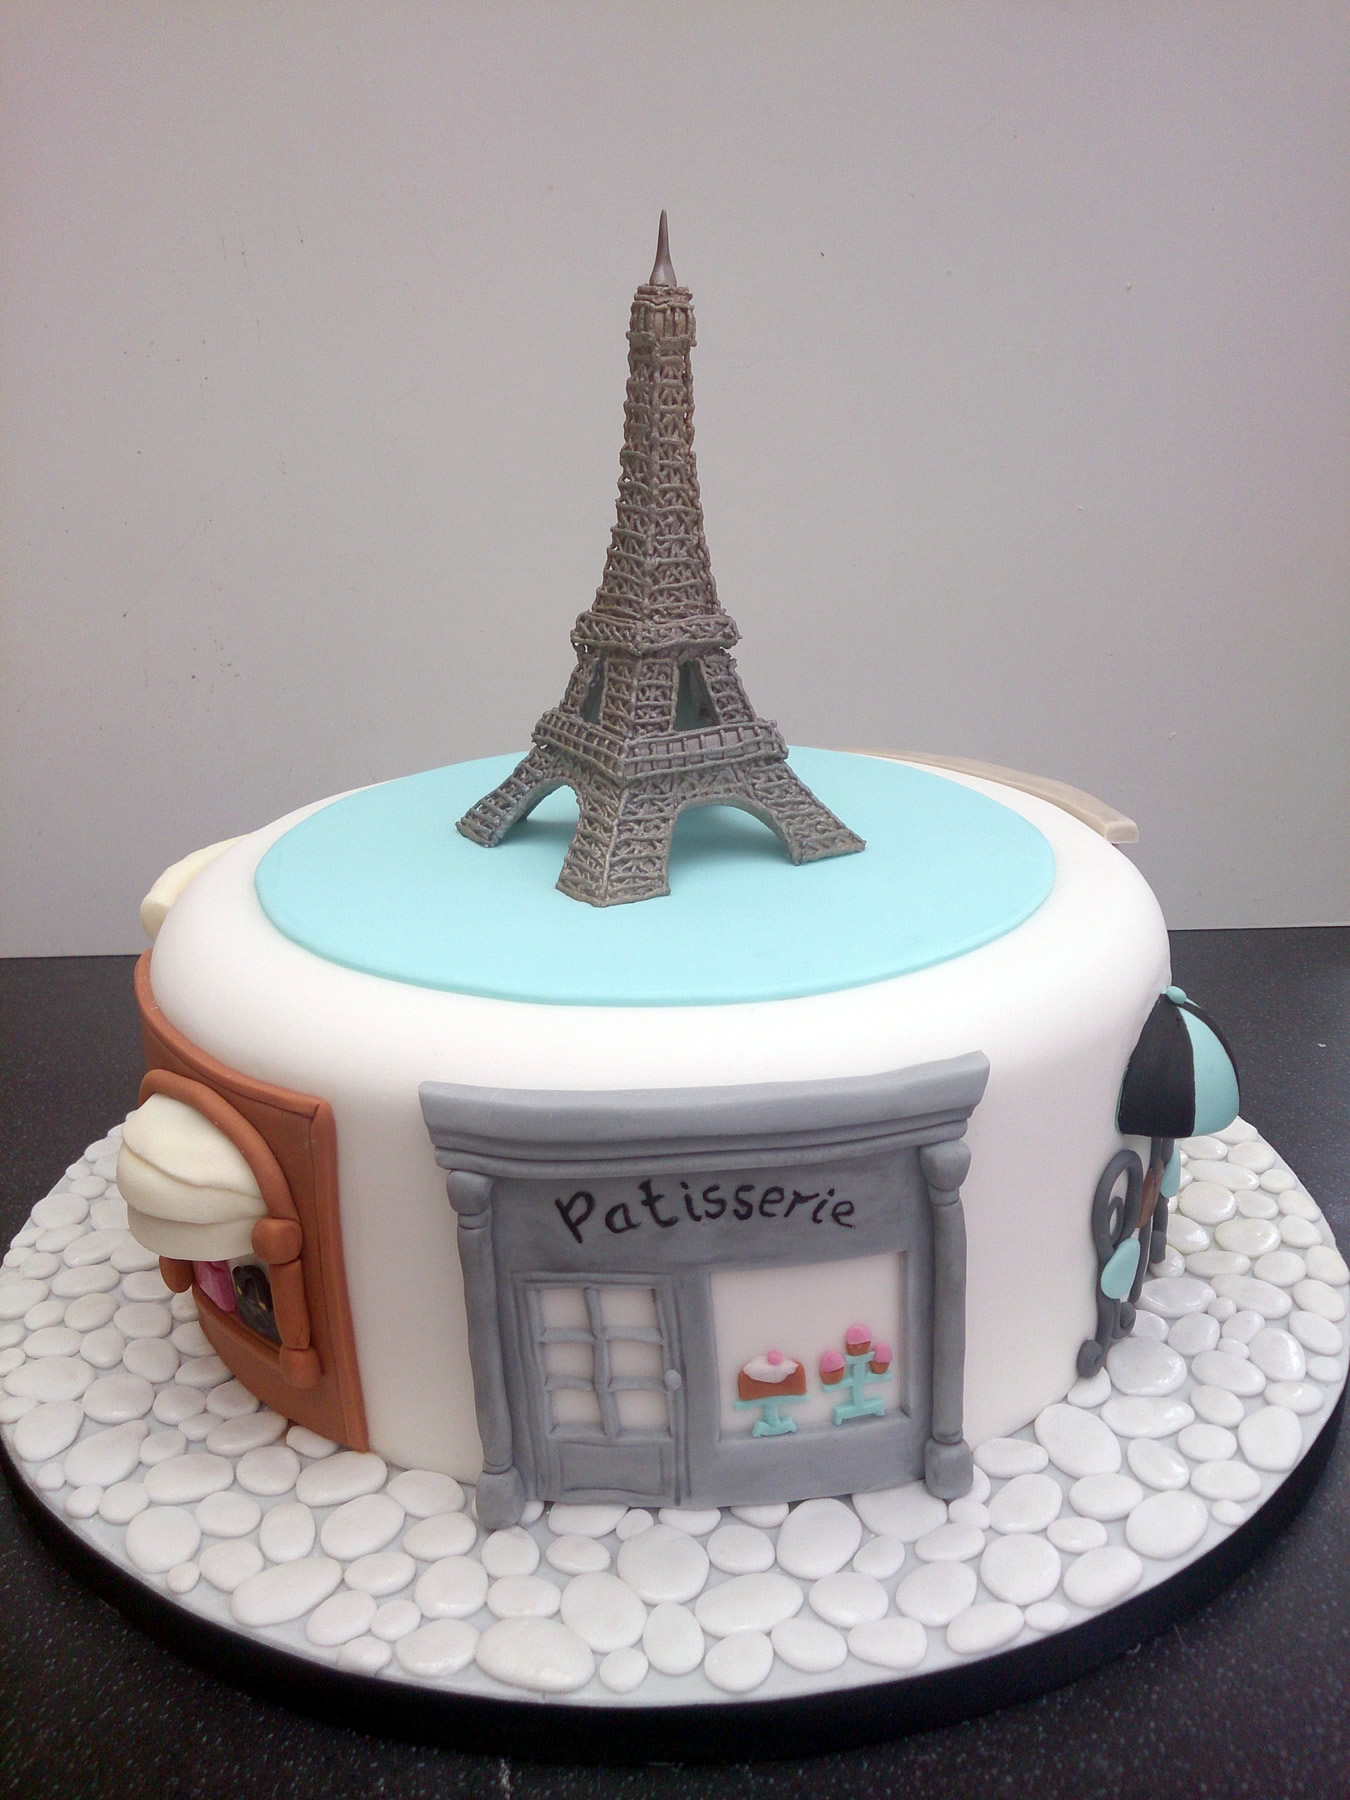 Paris Birthday - Decorated Cake by Bliss Pastry - CakesDecor